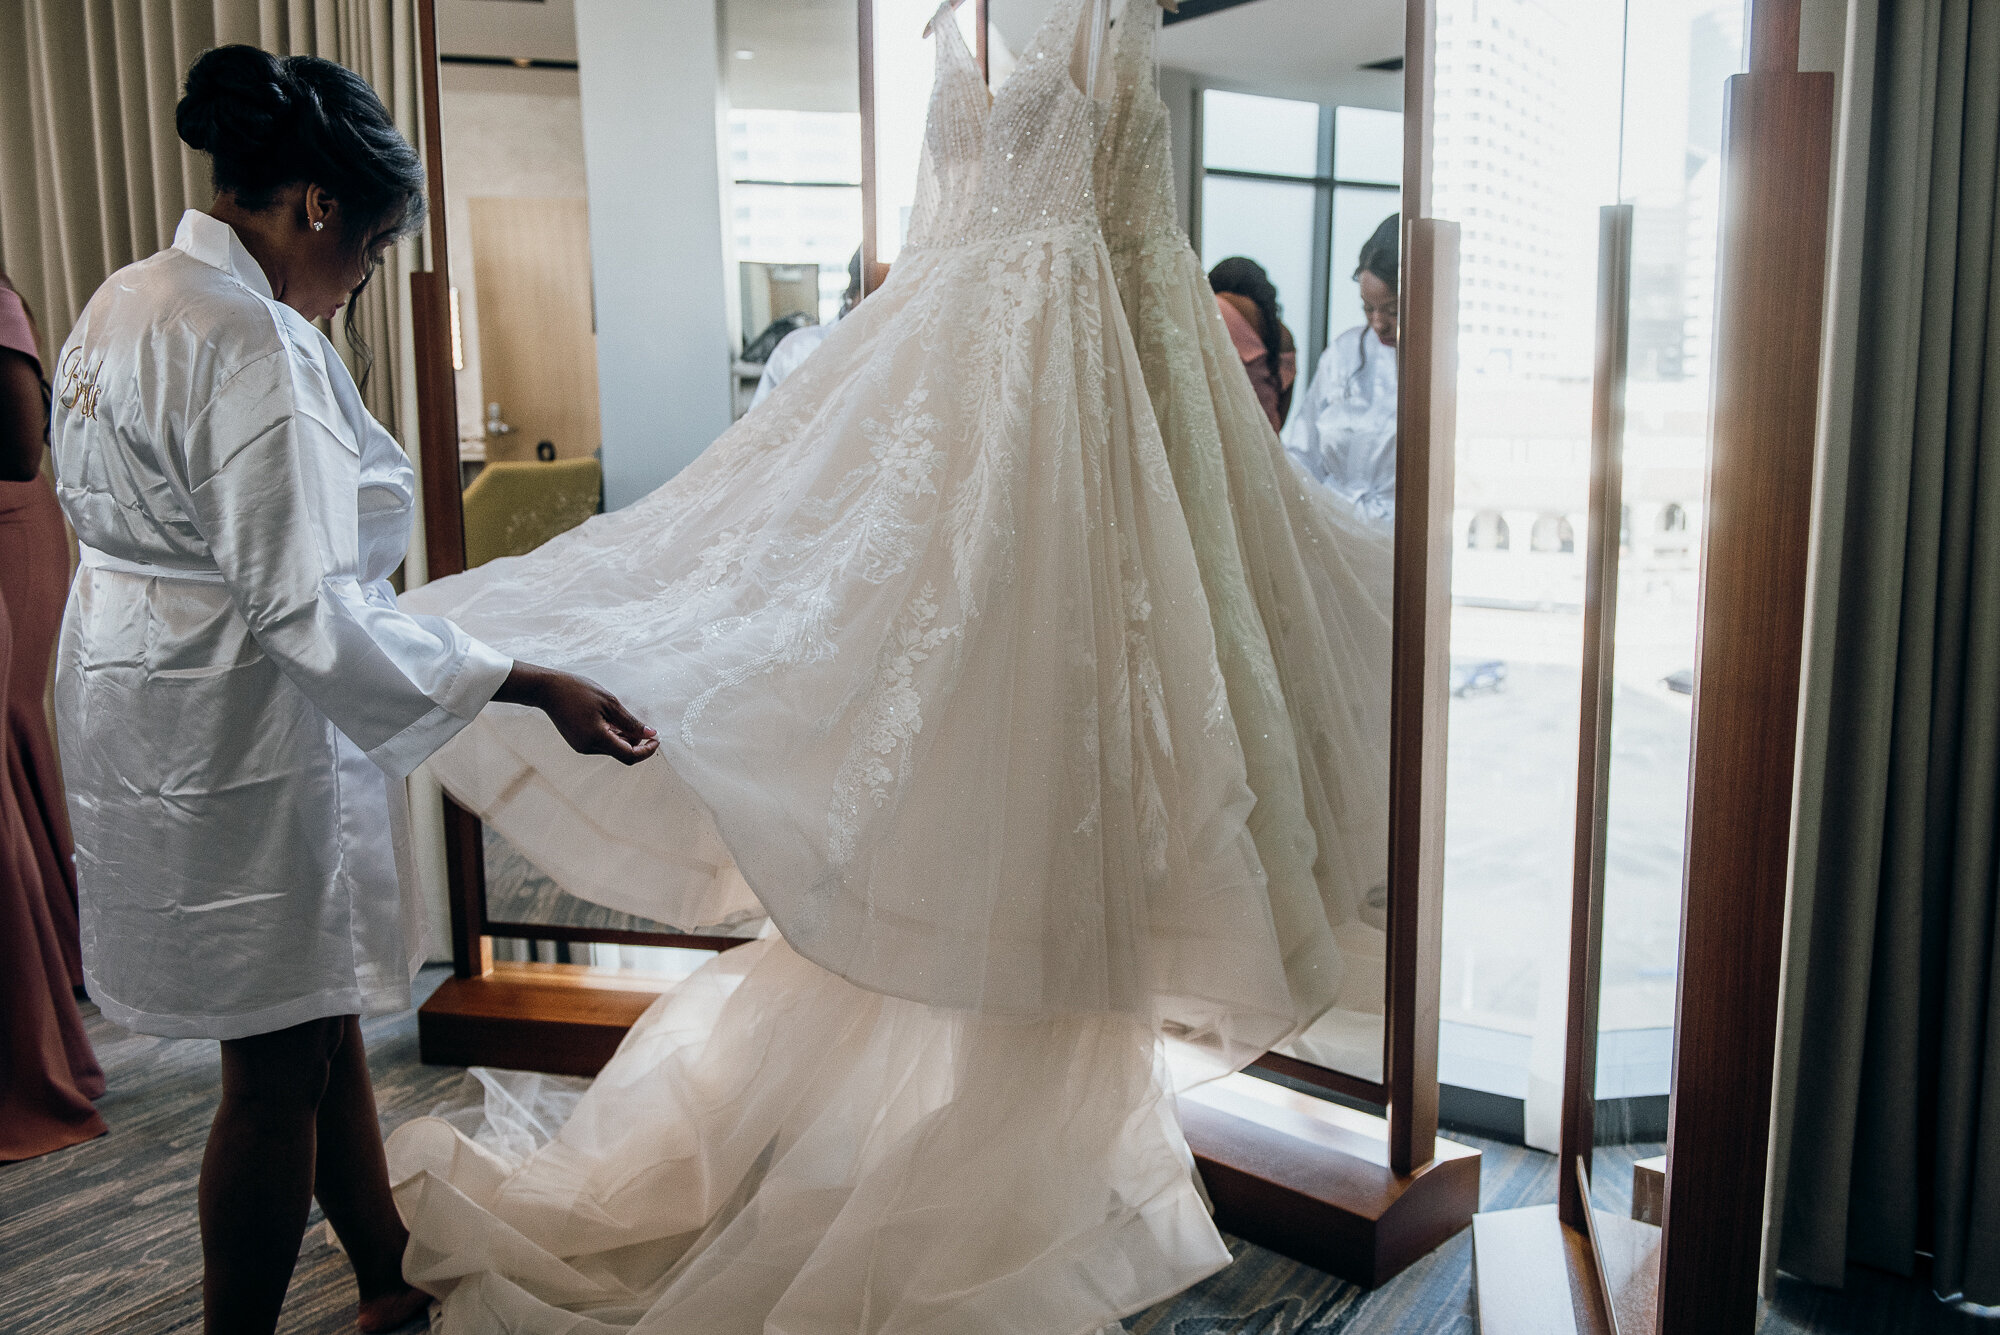 Intercontinental | San Diego Wedding Photography and Videography